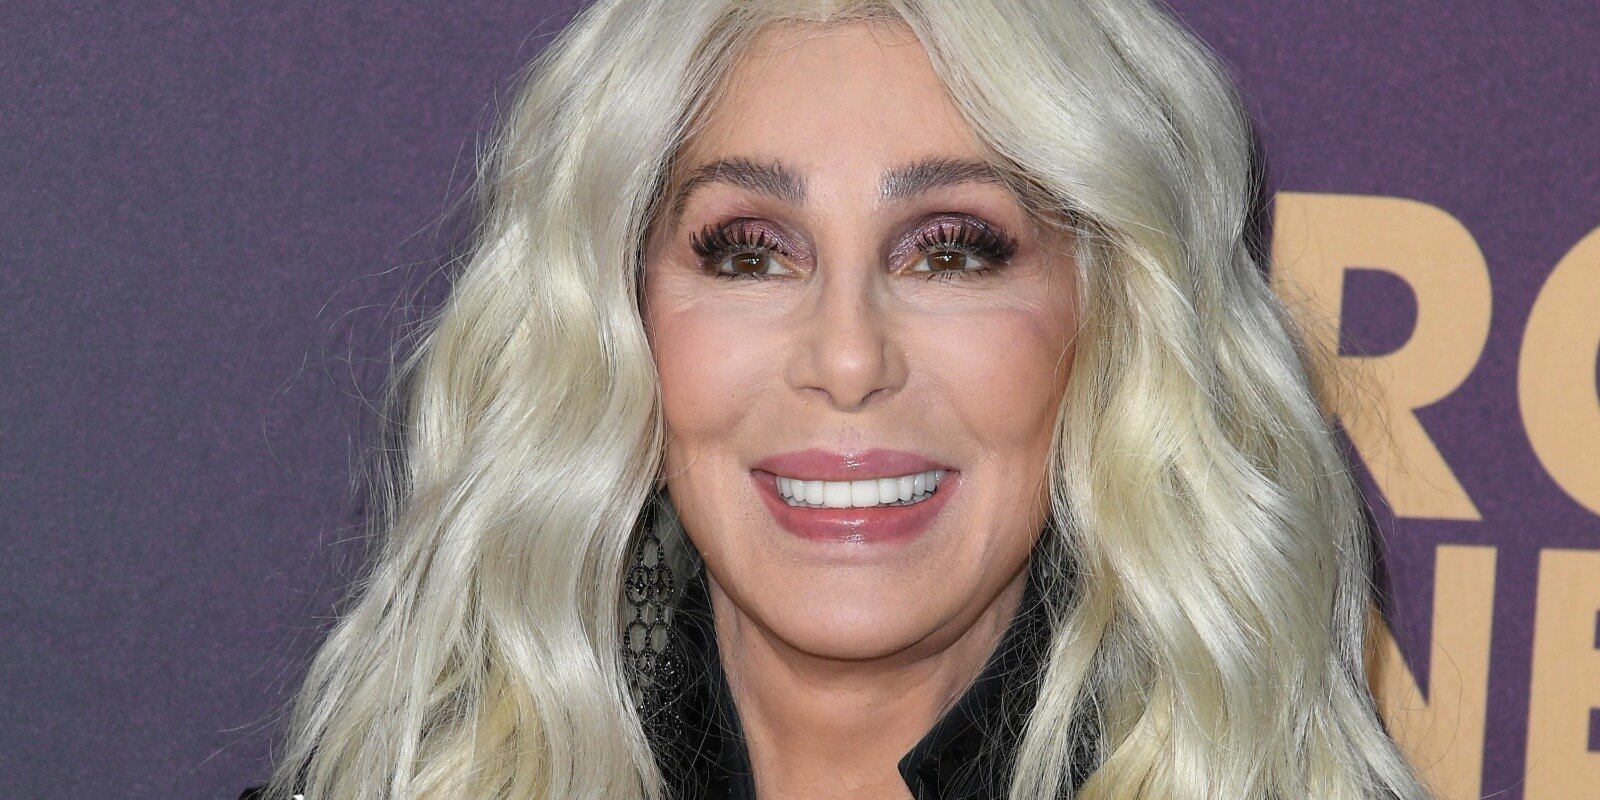 Cher photographed on March 02, 2023 in Los Angeles, California.